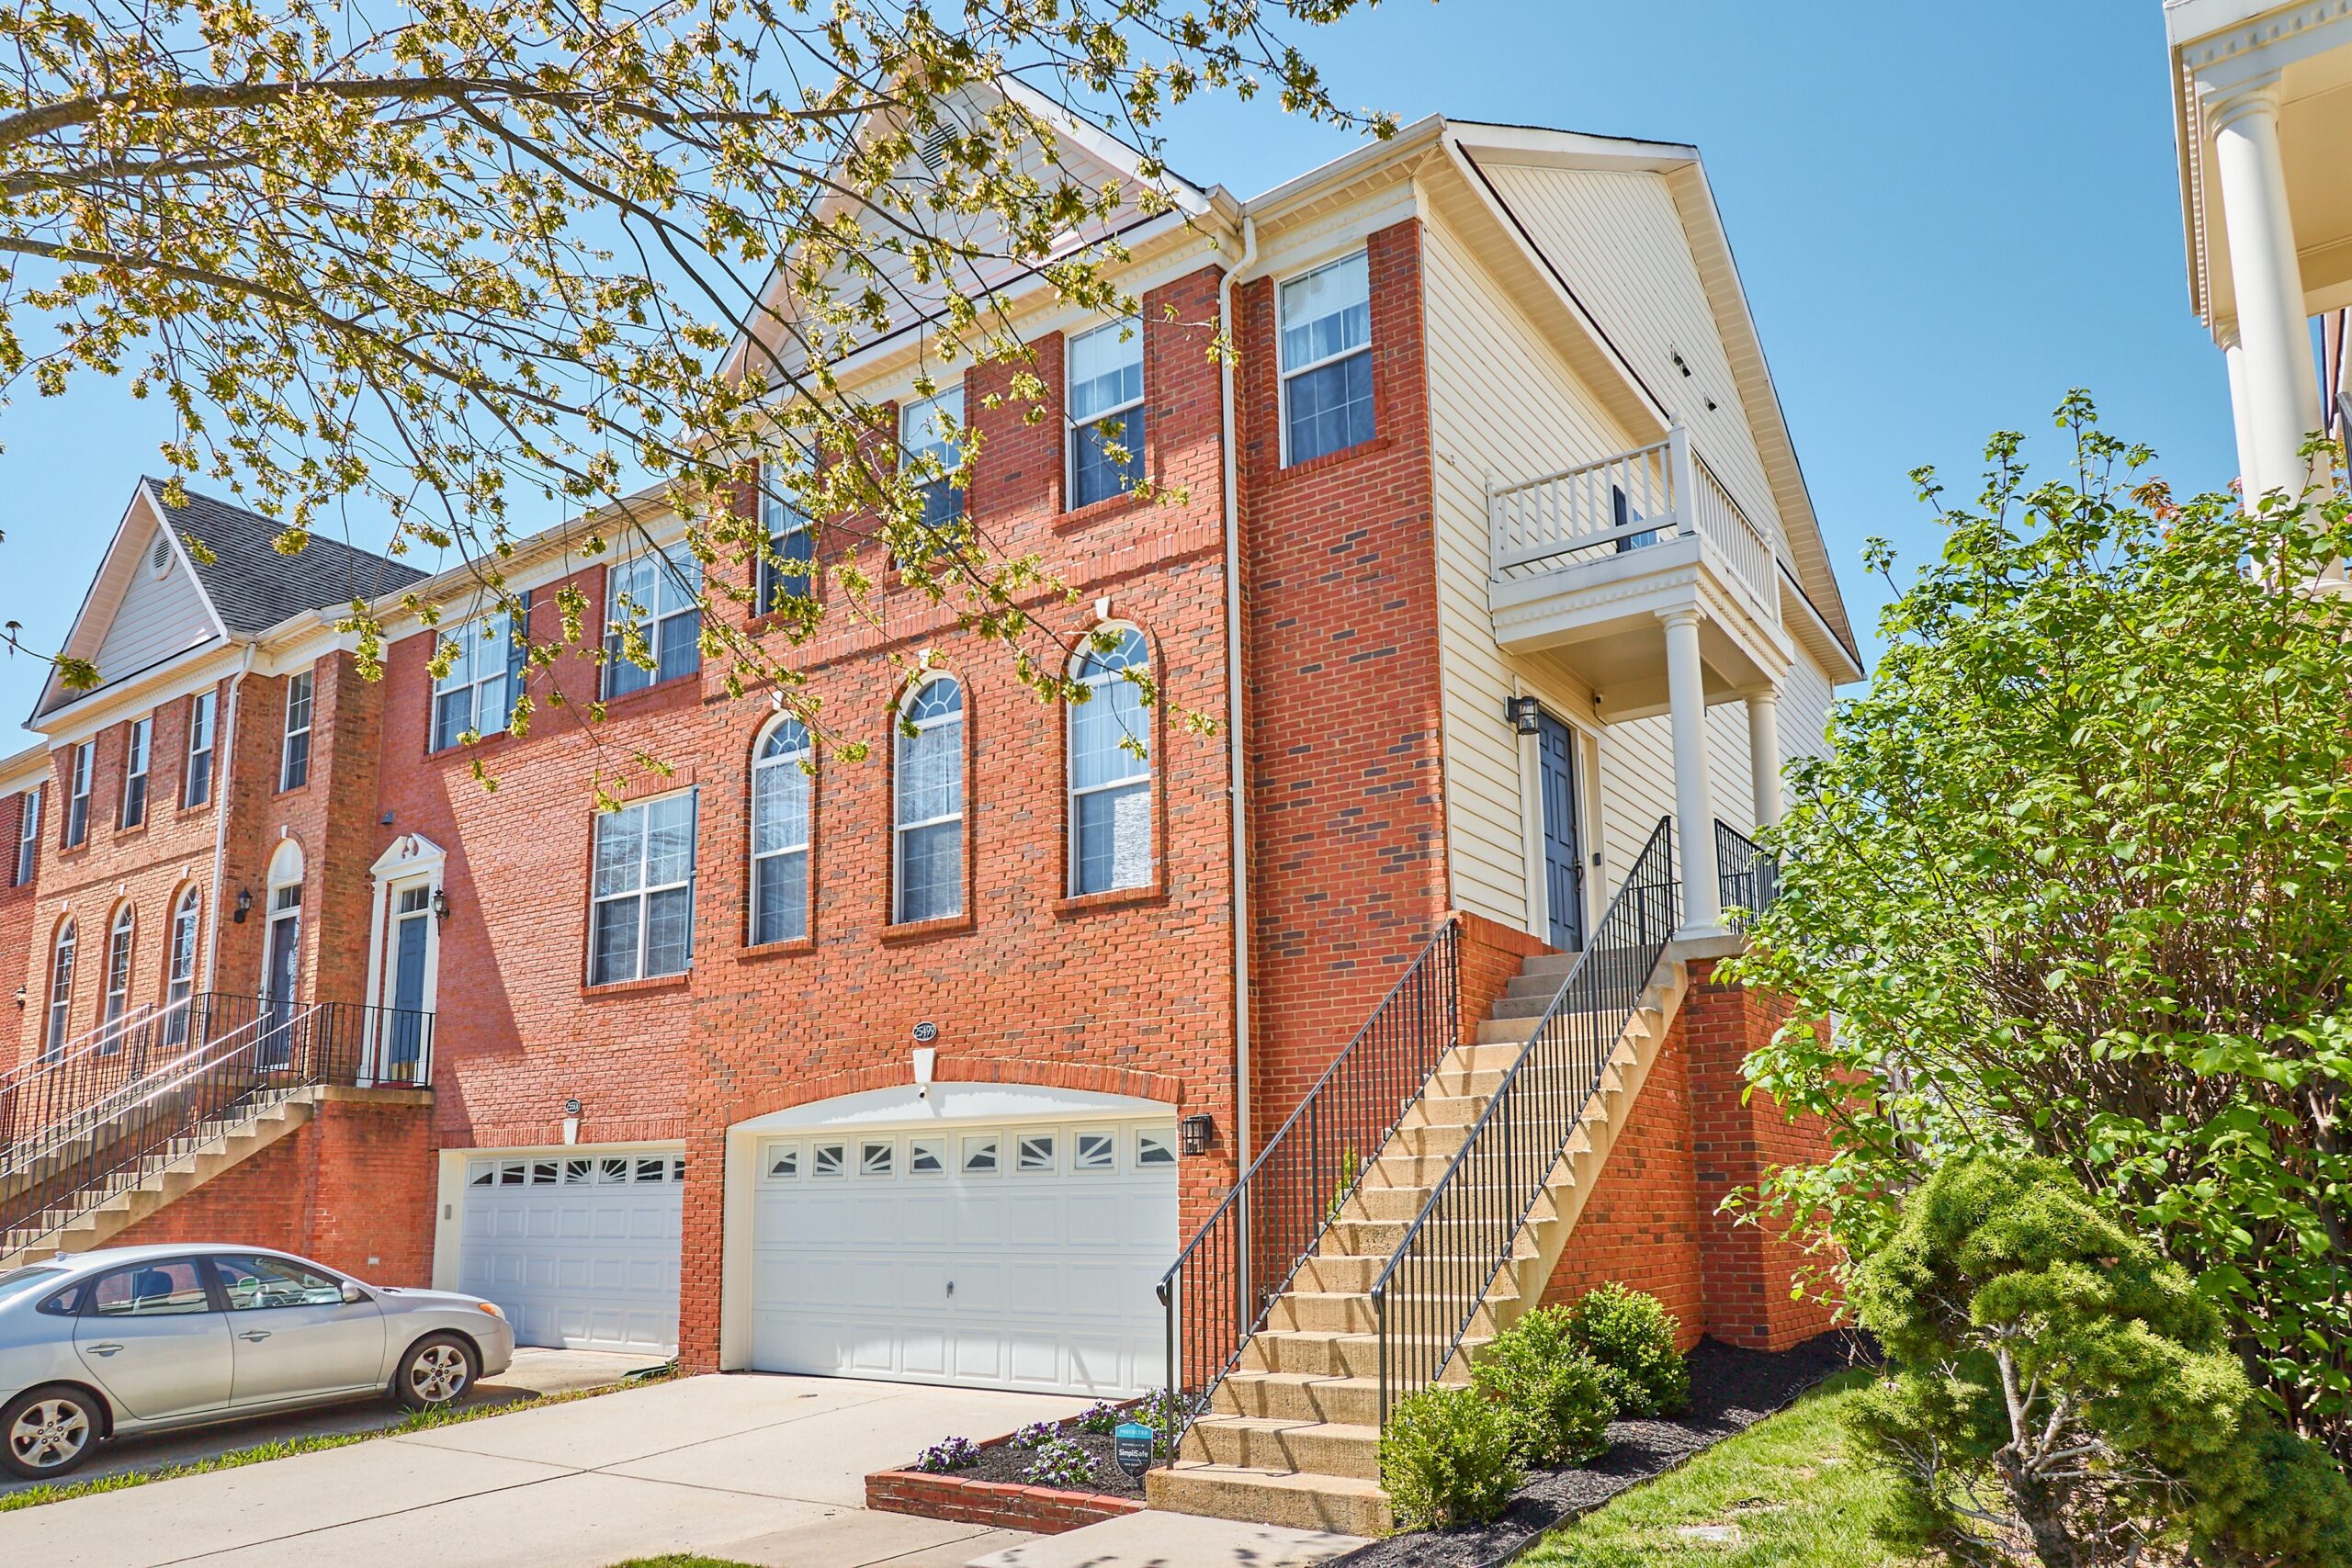 Professional exterior photo of 25499 Beresford Drive, Chantilly, Virginia - showing brick-front end unit townhome wish 2 car garage, 3 stories and side stairway entrance